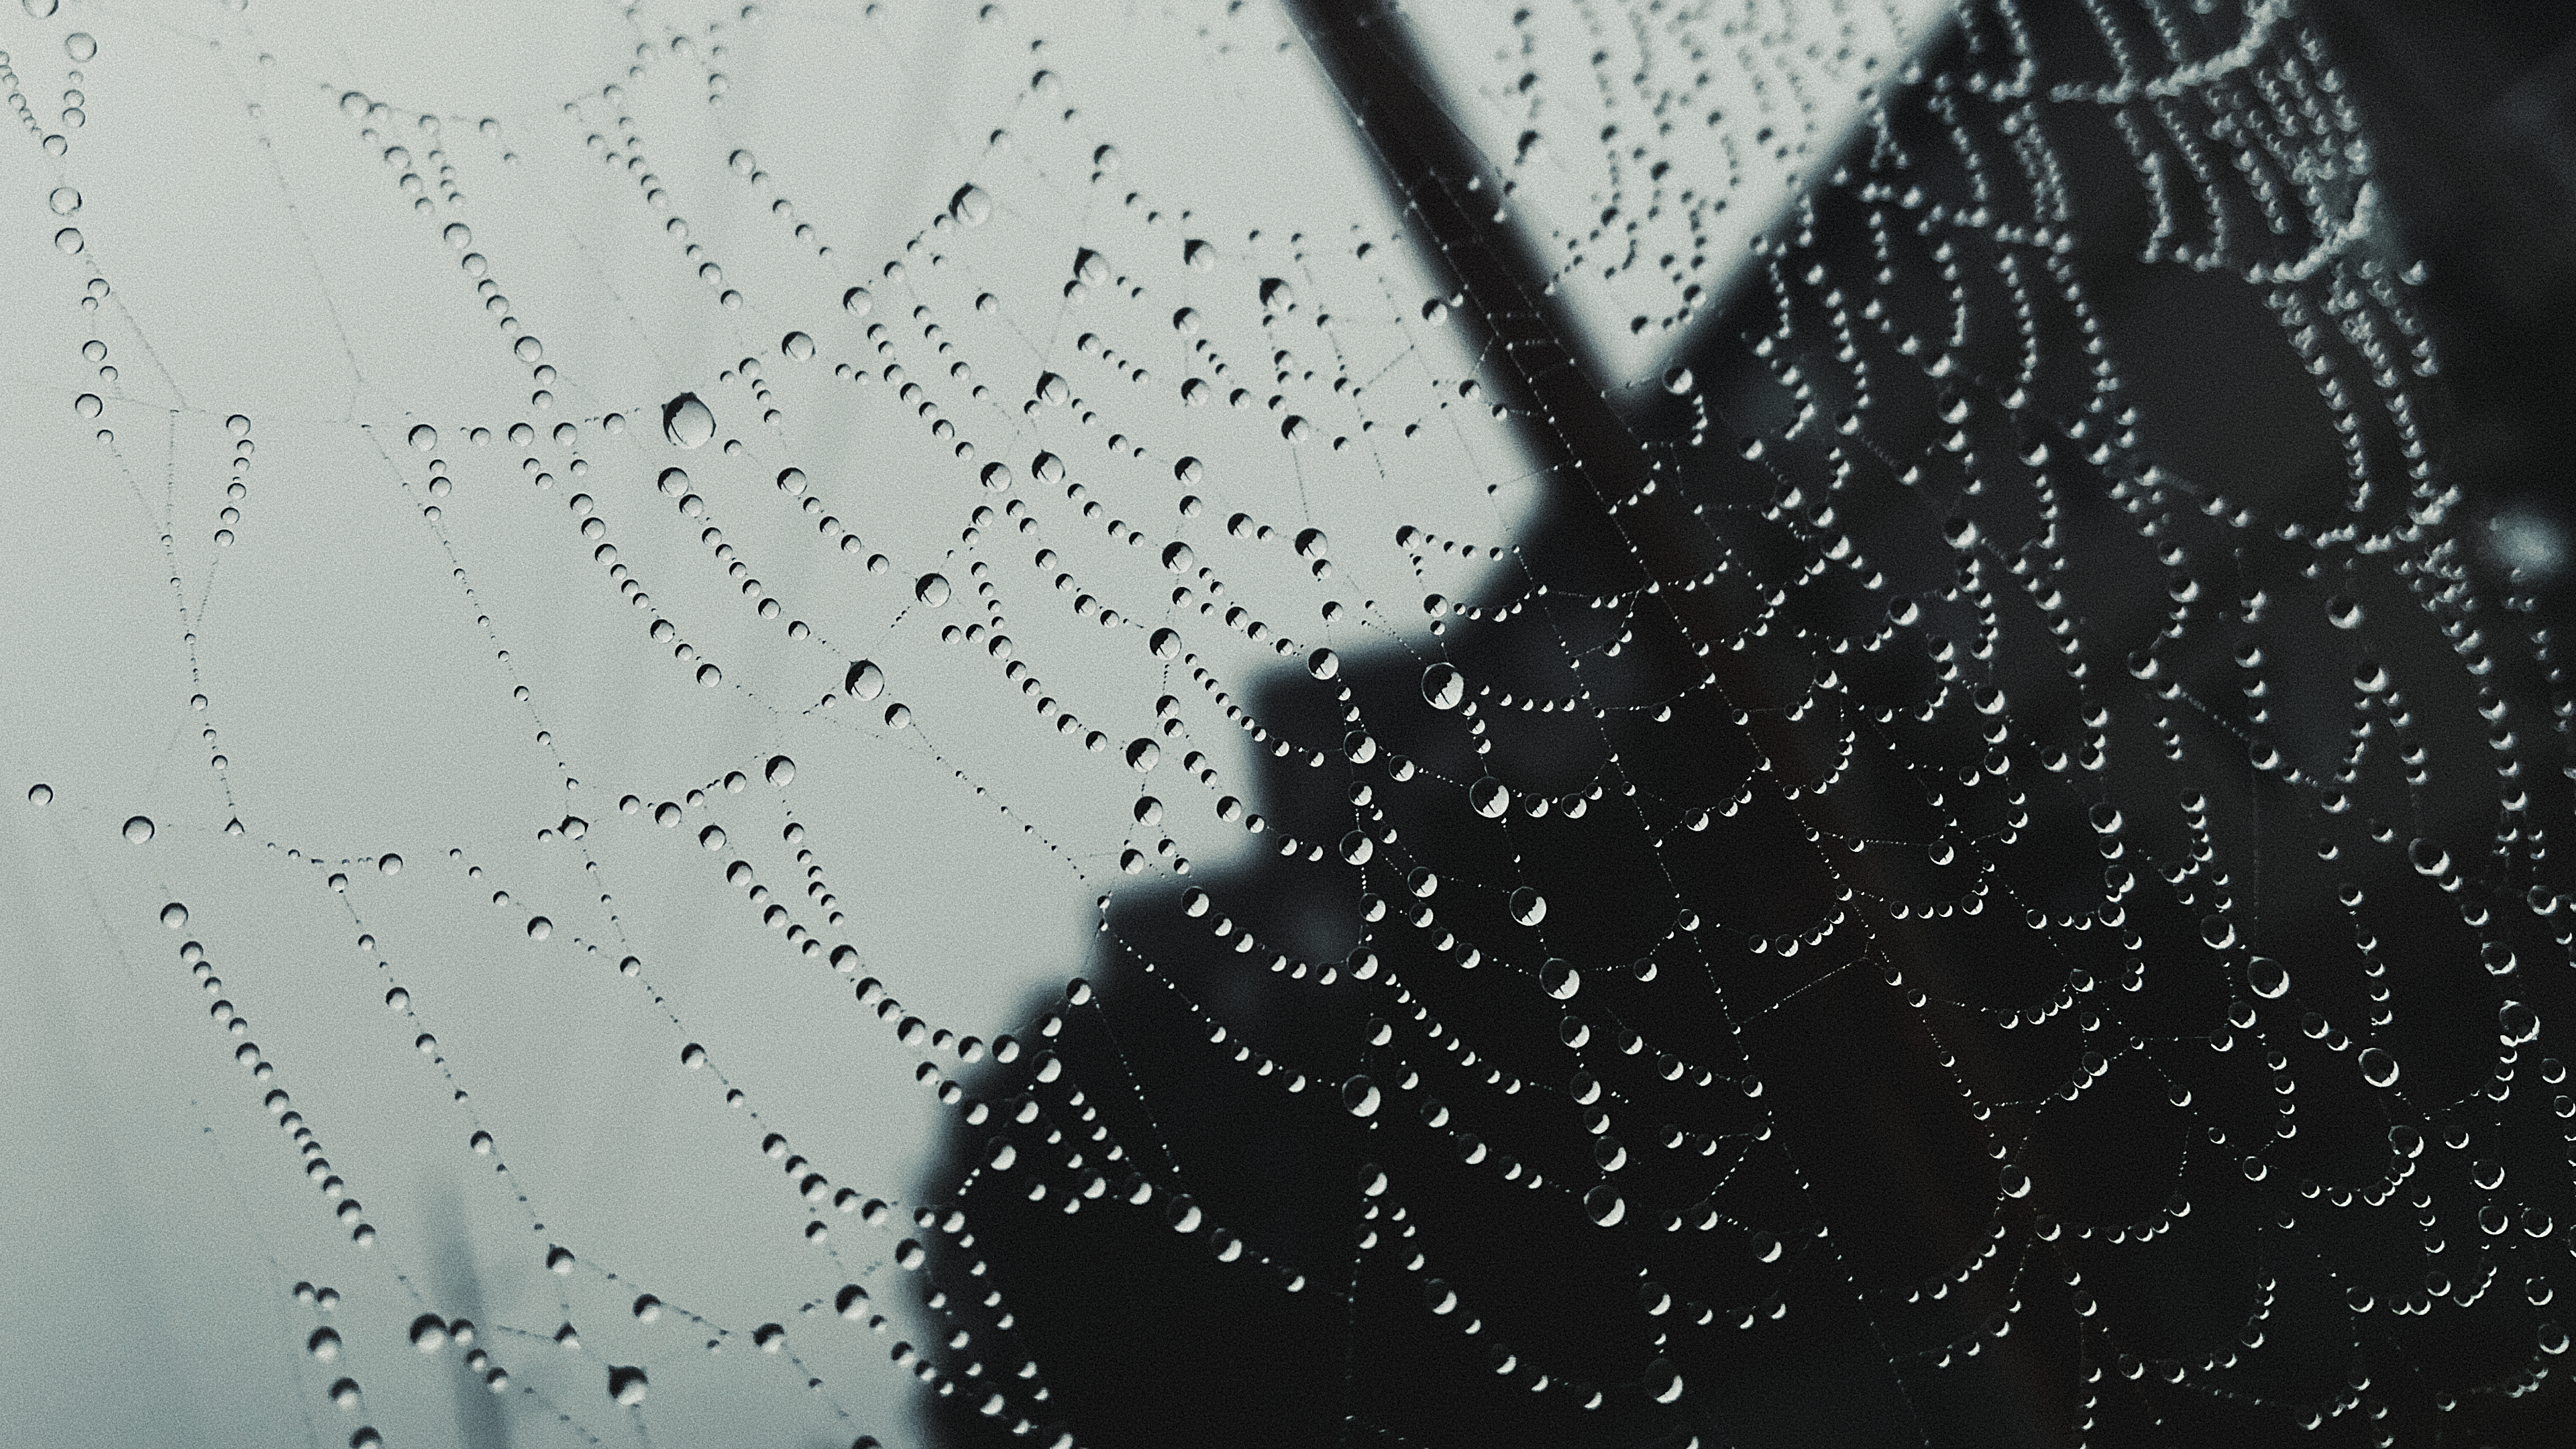 Nature Spiderwebs Water Drops Overcast Monochrome Closeup Photography Water 3840x2160